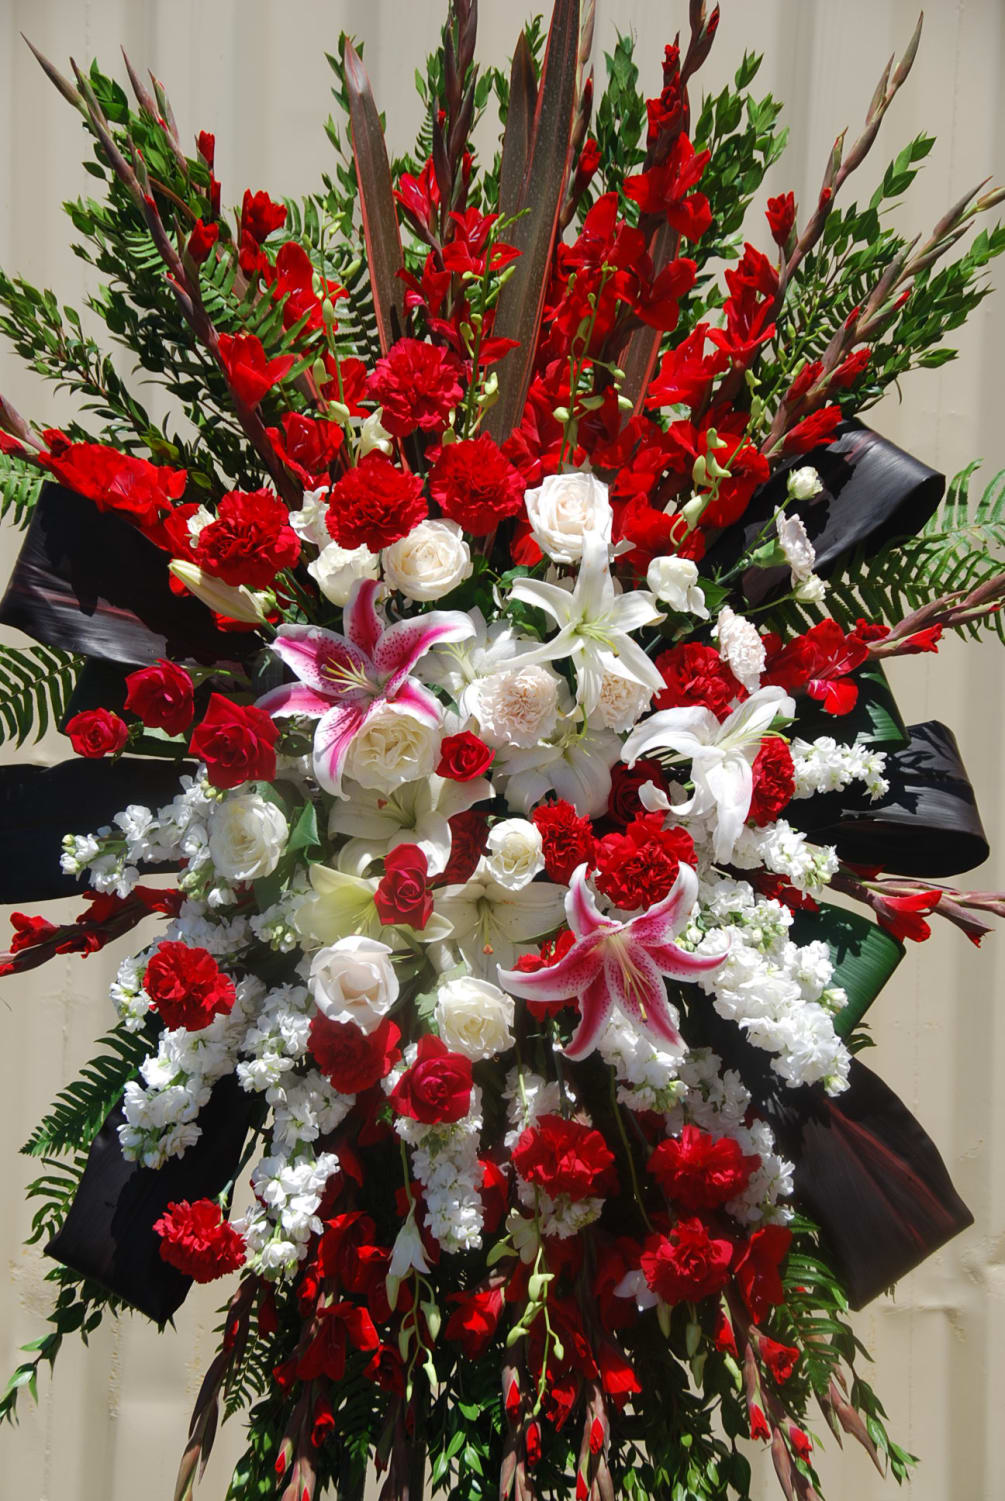 A large sympathy spray arrangement with red carnations, mixture of roses and